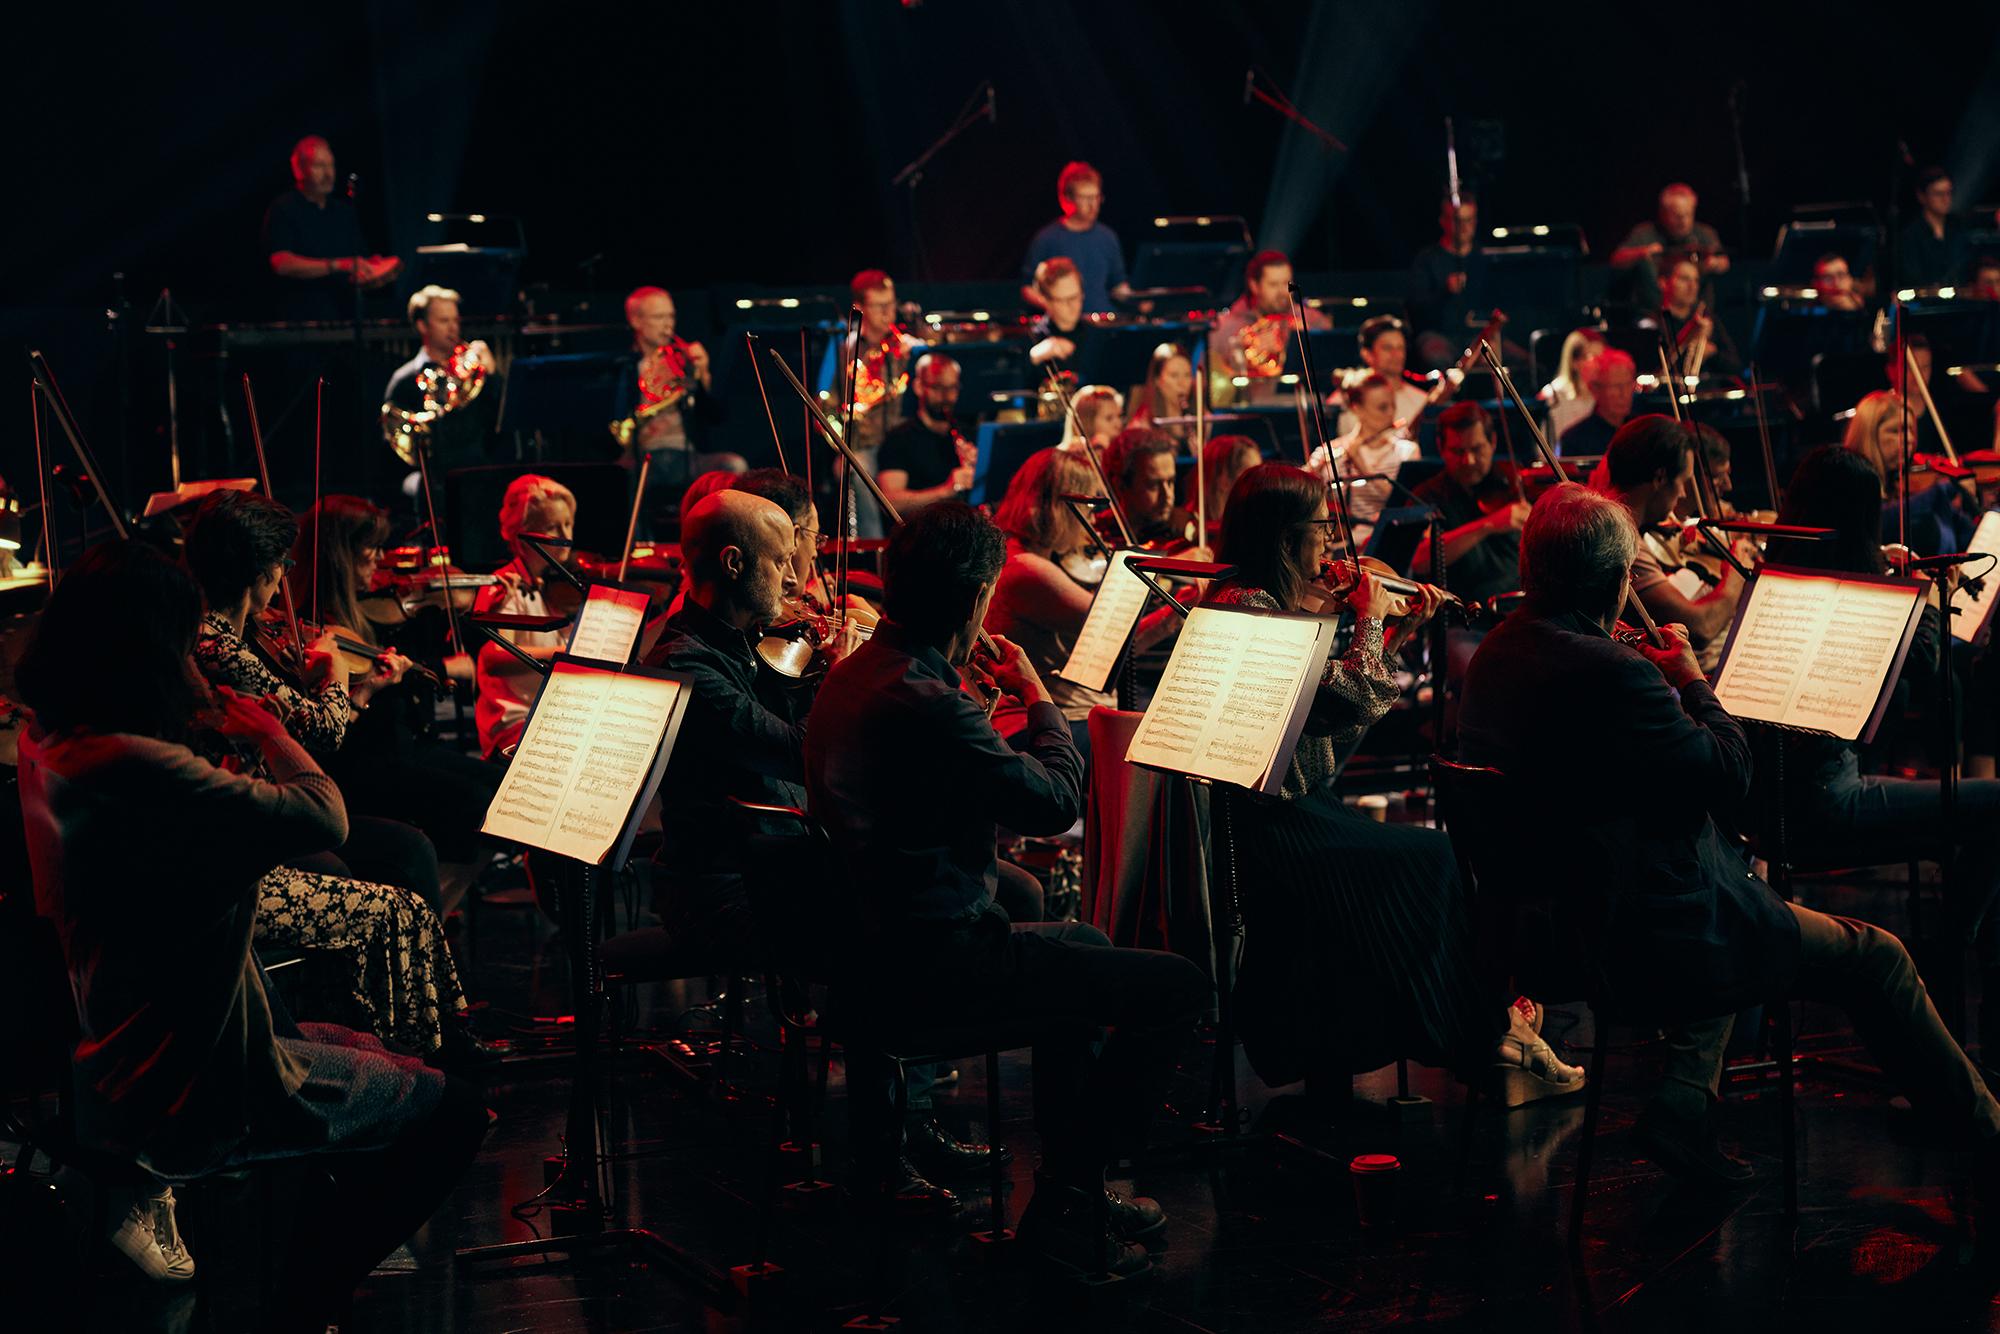 the Royal Philharmonic Orchestra's string section at the recording of global livestream performances of Igor Stravinsky's The Firebird, Petrushka, and The Rite Of Spring